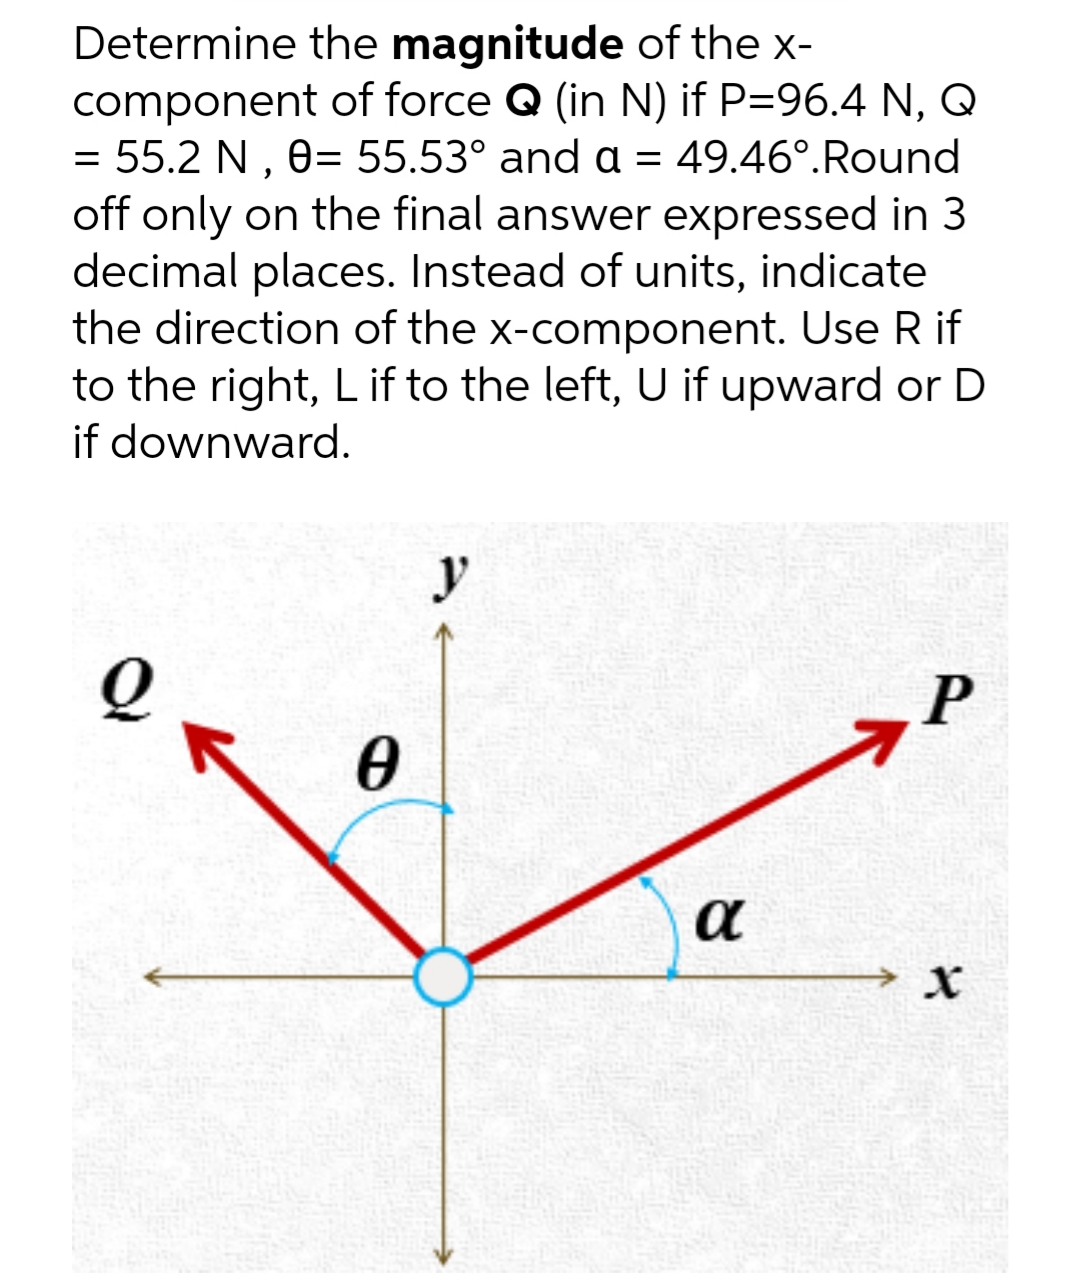 Determine the magnitude of the x-
component of force Q (in N) if P=96.4 N, Q
= 55.2 N , 0= 55.53° and a = 49.46°.Round
off only on the final answer expressed in 3
decimal places. Instead of units, indicate
the direction of the x-component. Use R if
to the right, L if to the left, U if upward or D
if downward.
y
P
